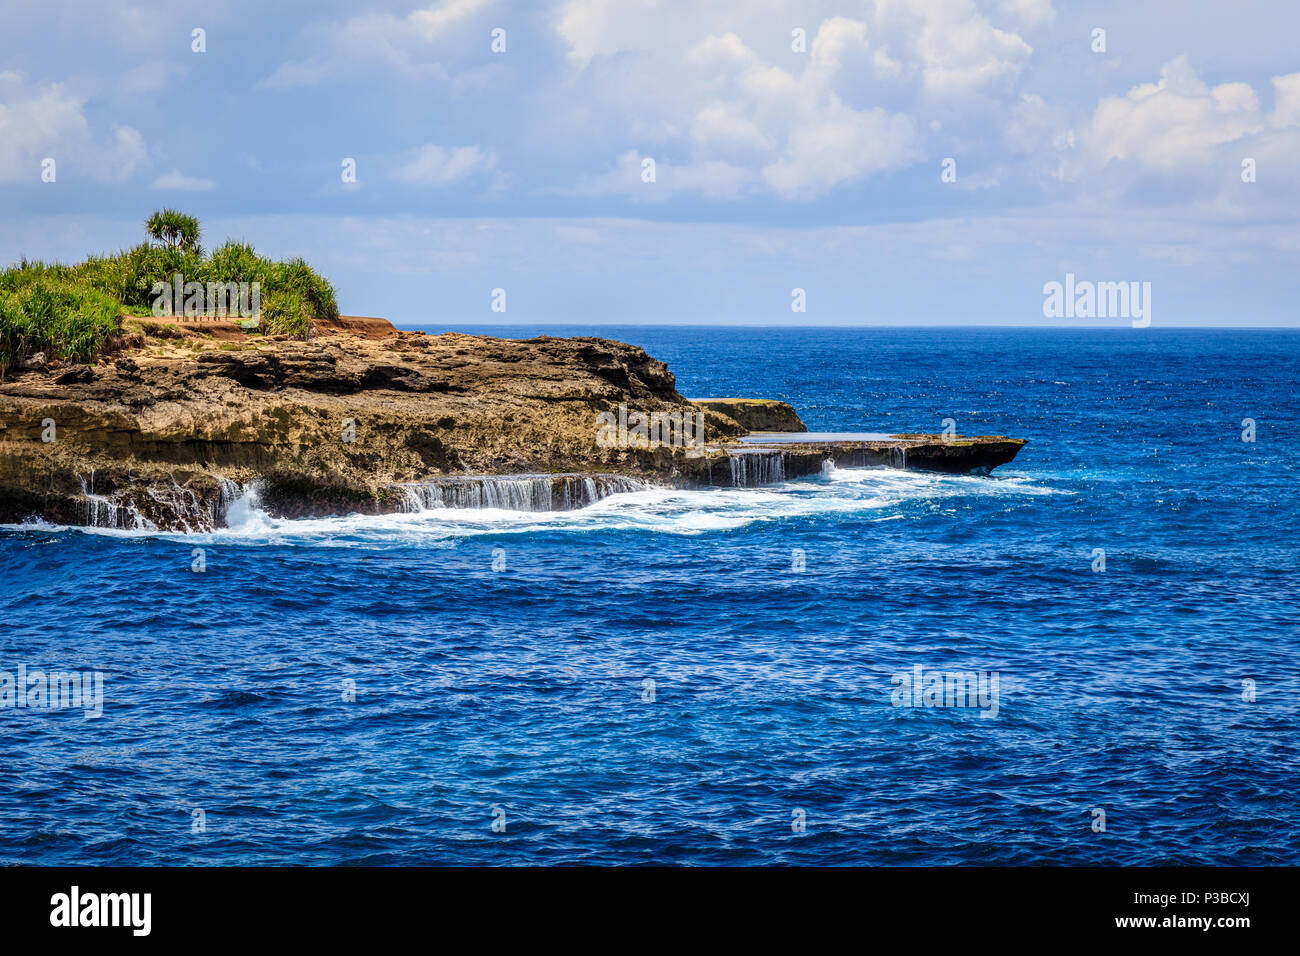 View from Sunset Point beach at Sandy Bay, Nusa Lembongan, Indonesia Stock Photo